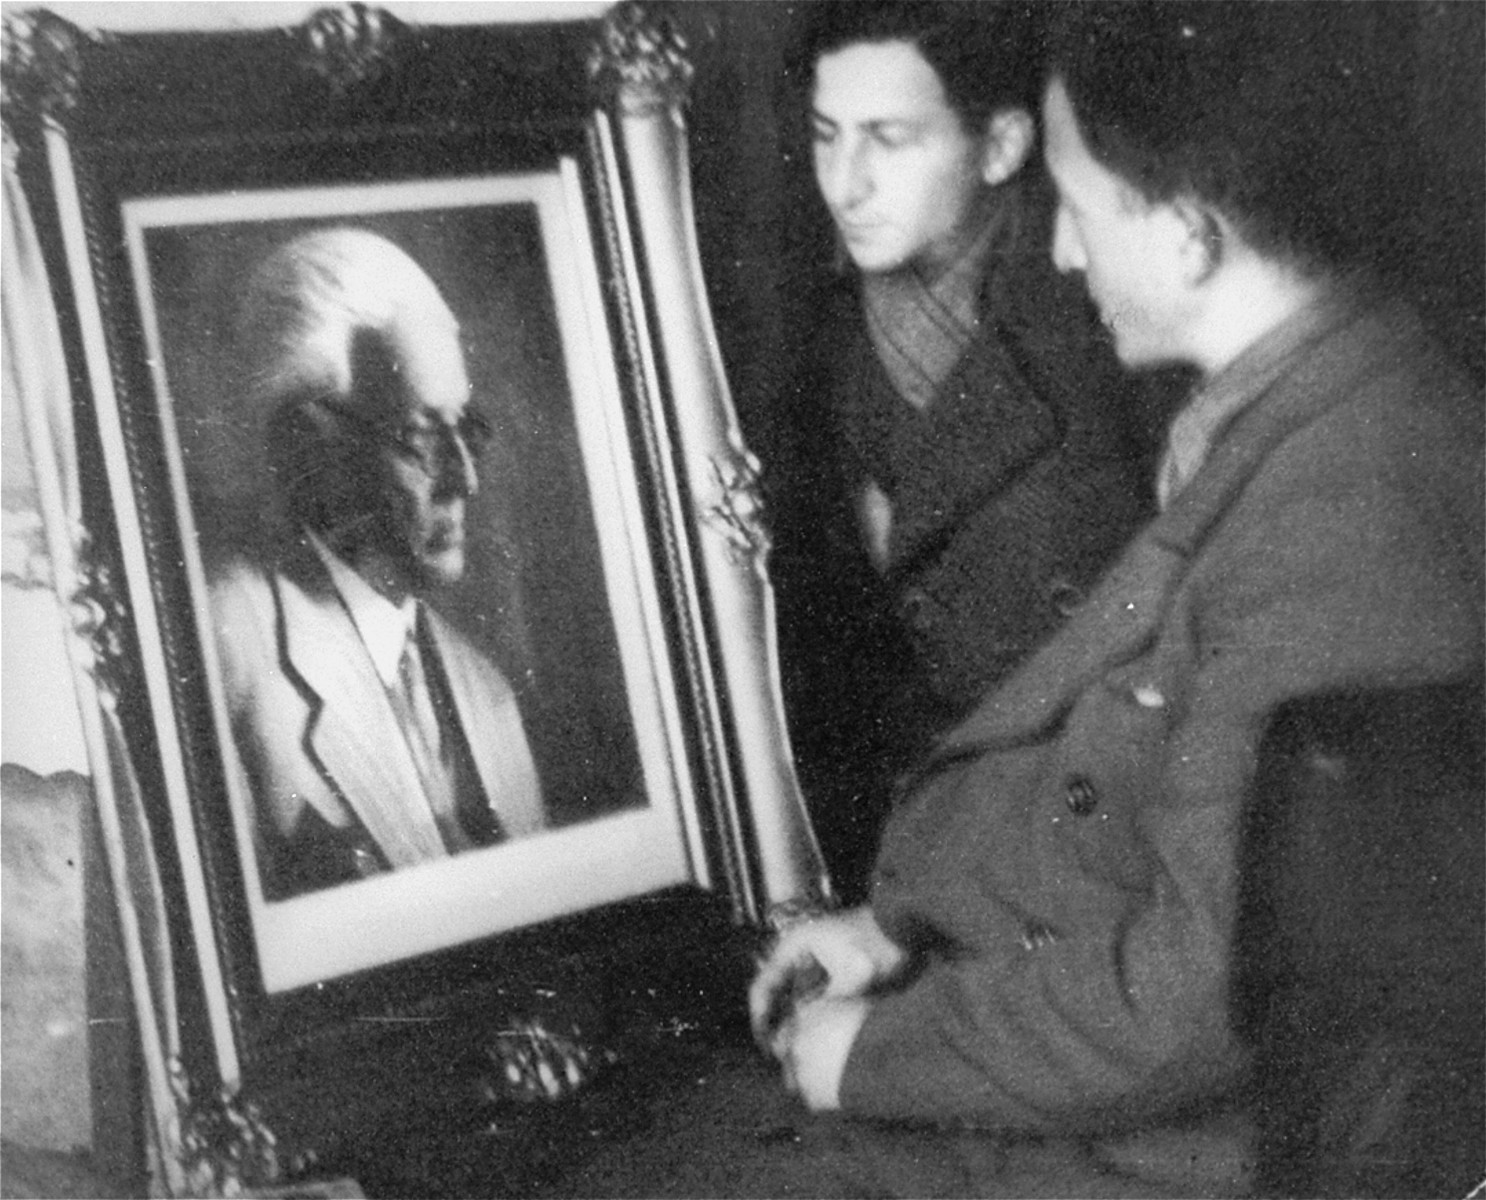 Nachman Zonabend (center) and Mendel Grosman (right) examine a framed portrait of Jewish Council chairman Mordechai Chaim Rumkowski.  

The portrait was photographed by Mendel Grosman and had to be displayed in every office in the Lodz ghetto. The original framed portrait was given to Rumkowski.